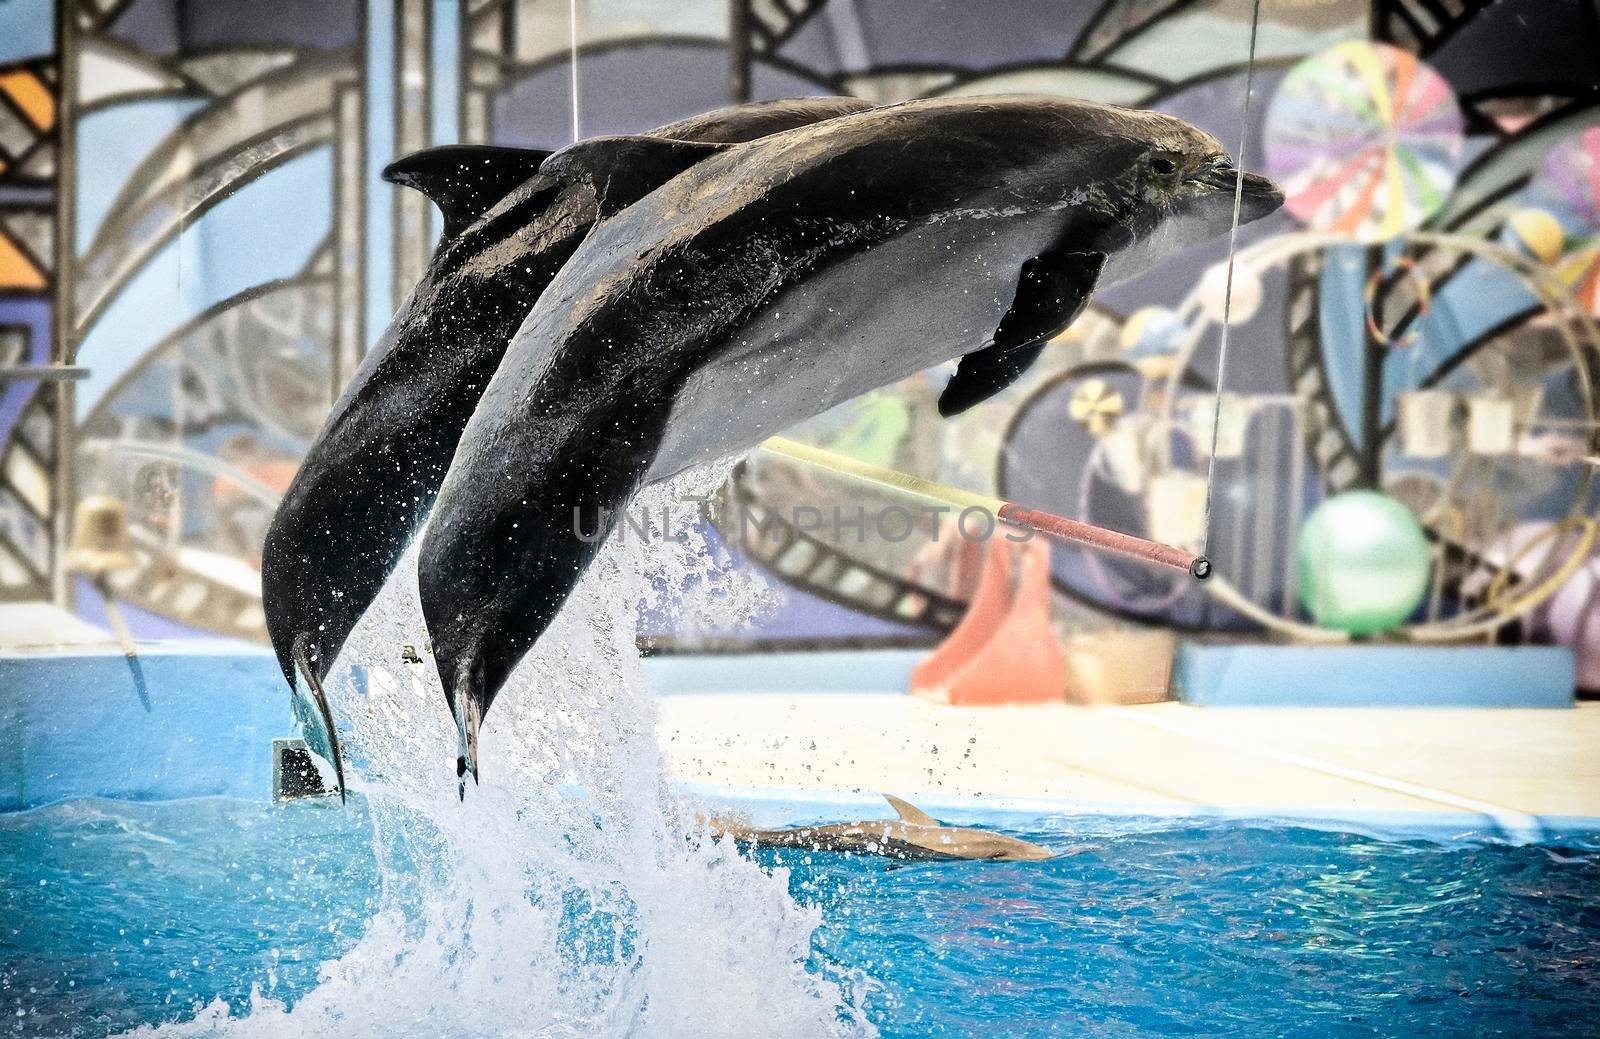 Two dolphins at the Dolphinarium during the presentation jump out of the water over the bar.